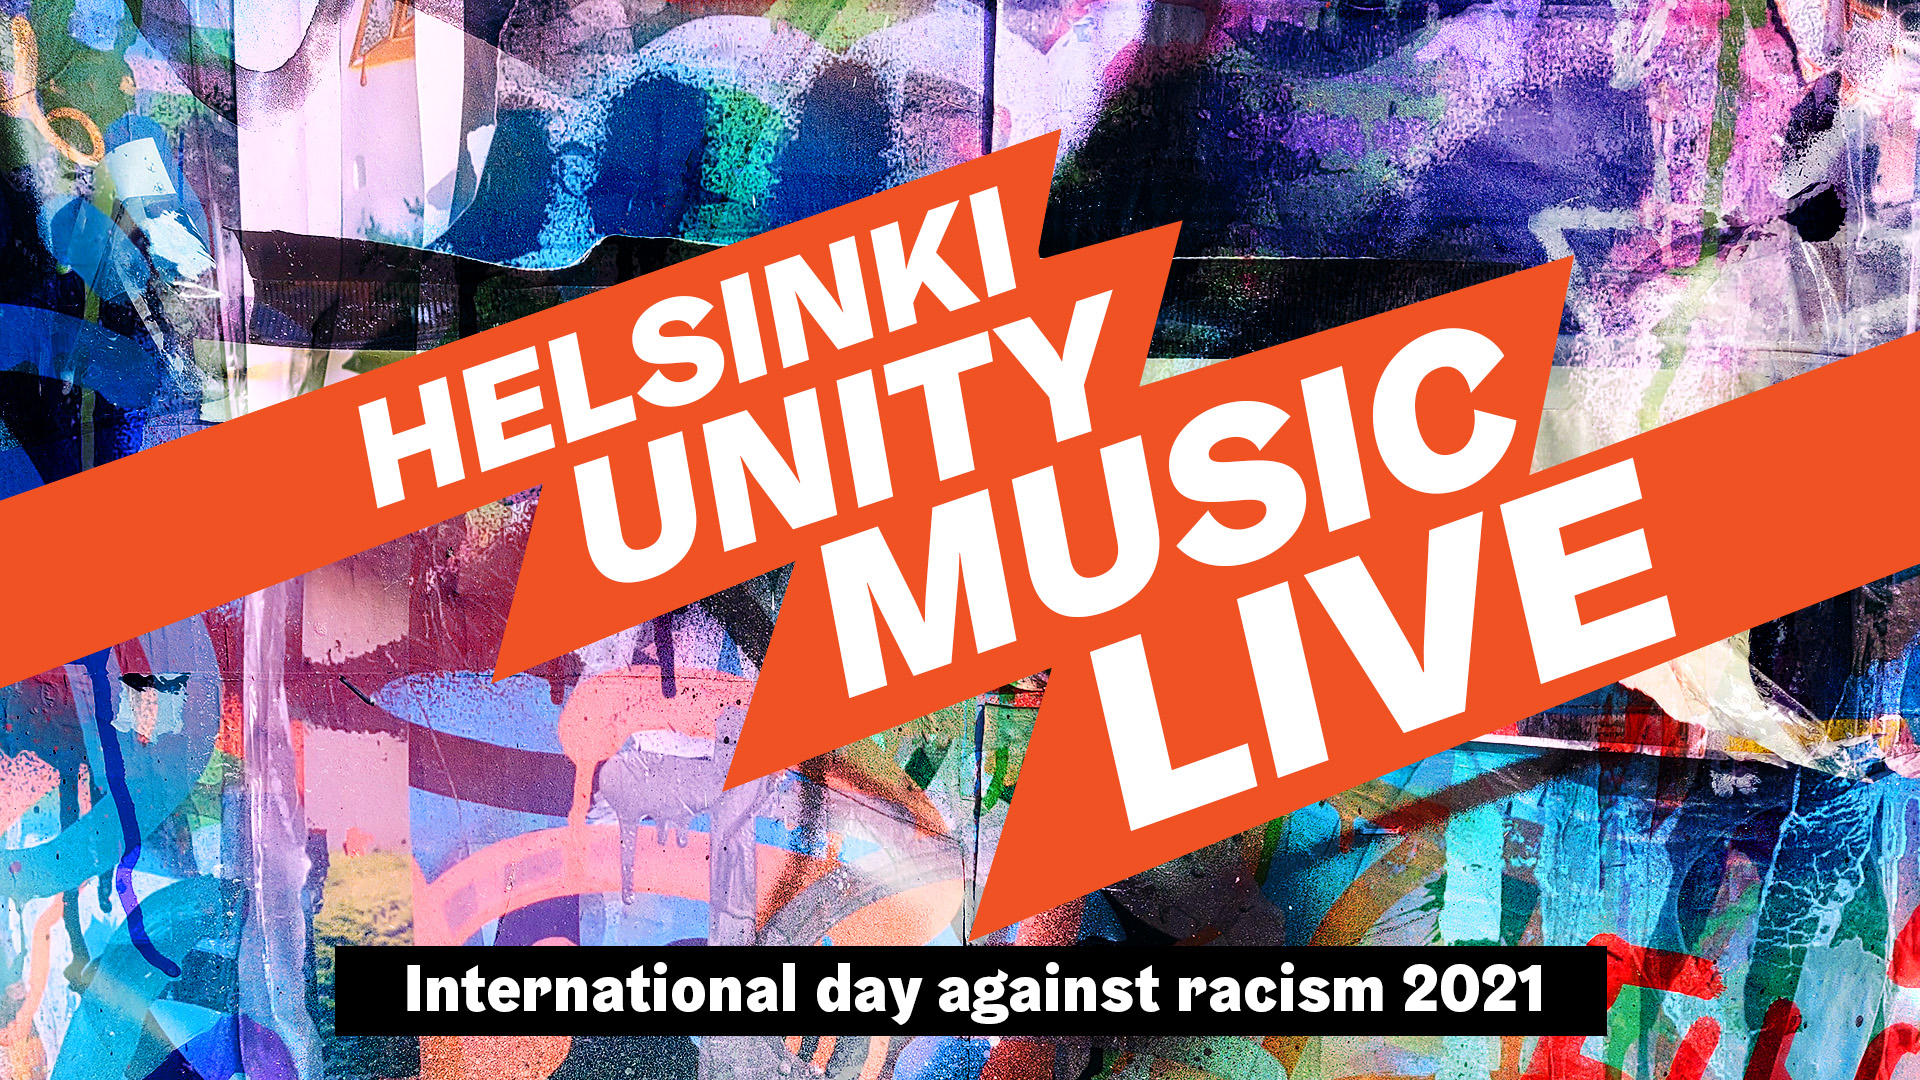 The International Day Against Racism: Talks against racism + Helsinki Unity Music - live